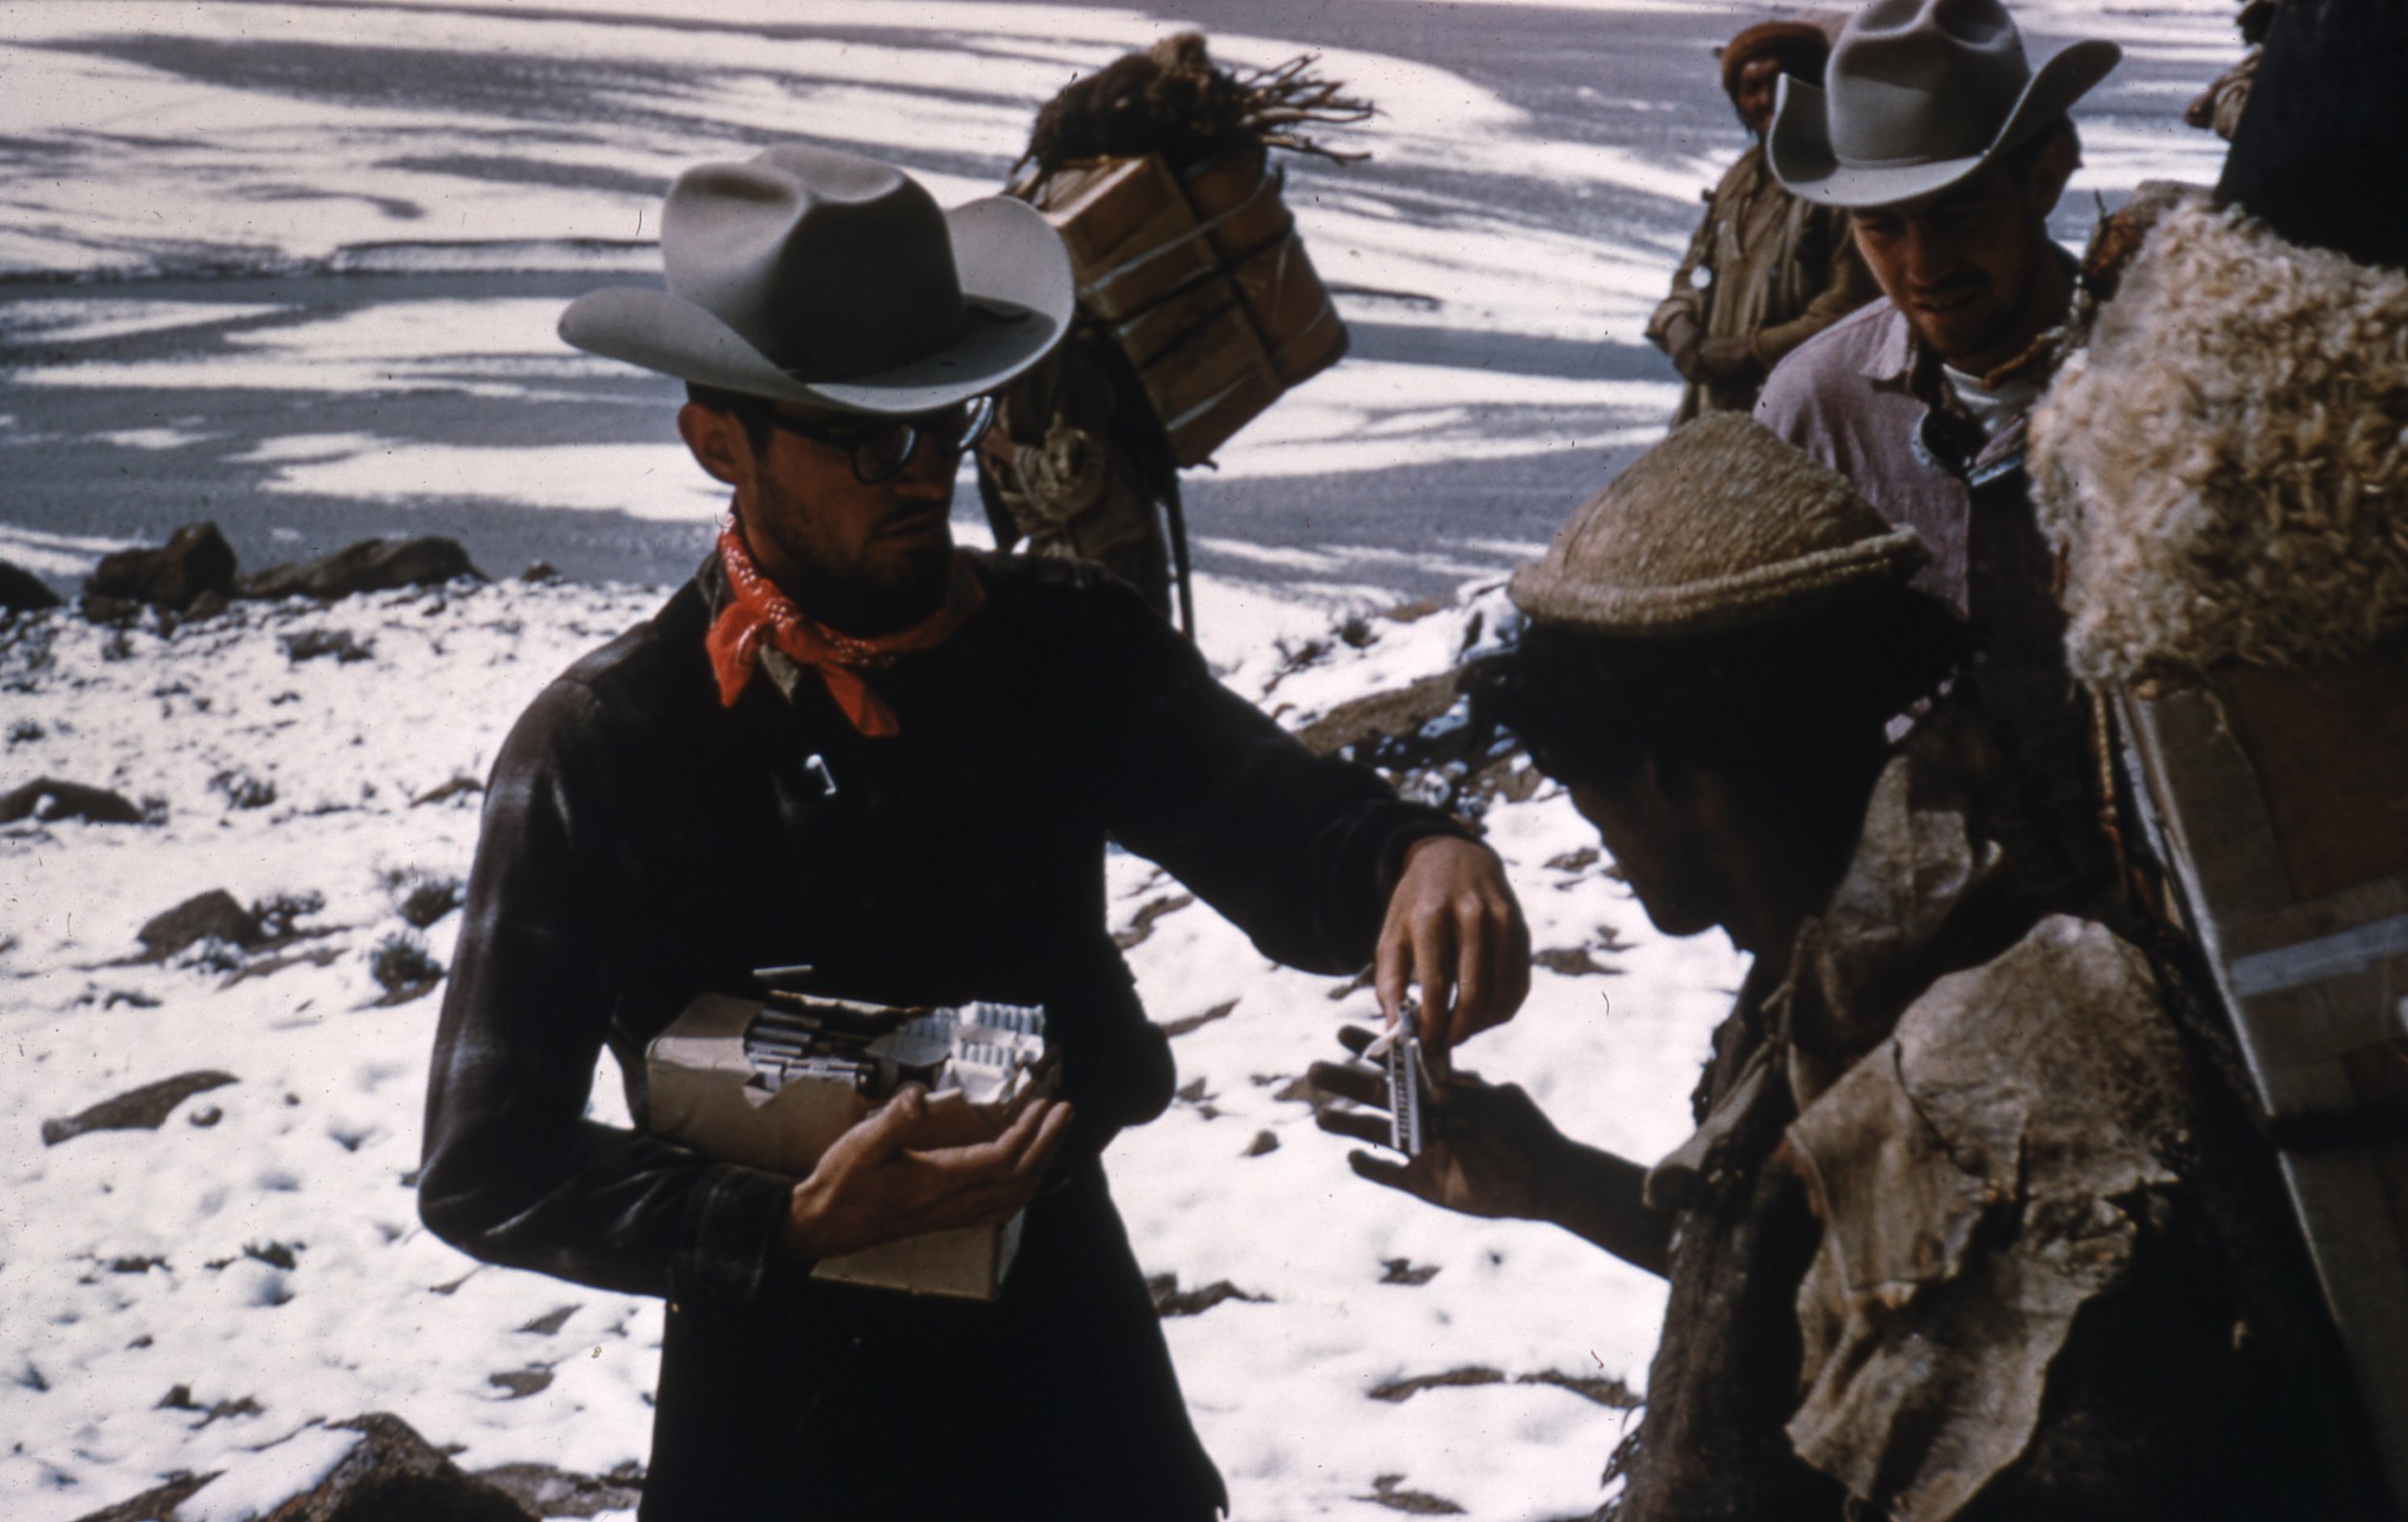  The expedition had too few cigarettes to meet the required amount for the porters. A crisis was averted by trading their Camel cigarettes for local brands at a rate of 2 to 1. 